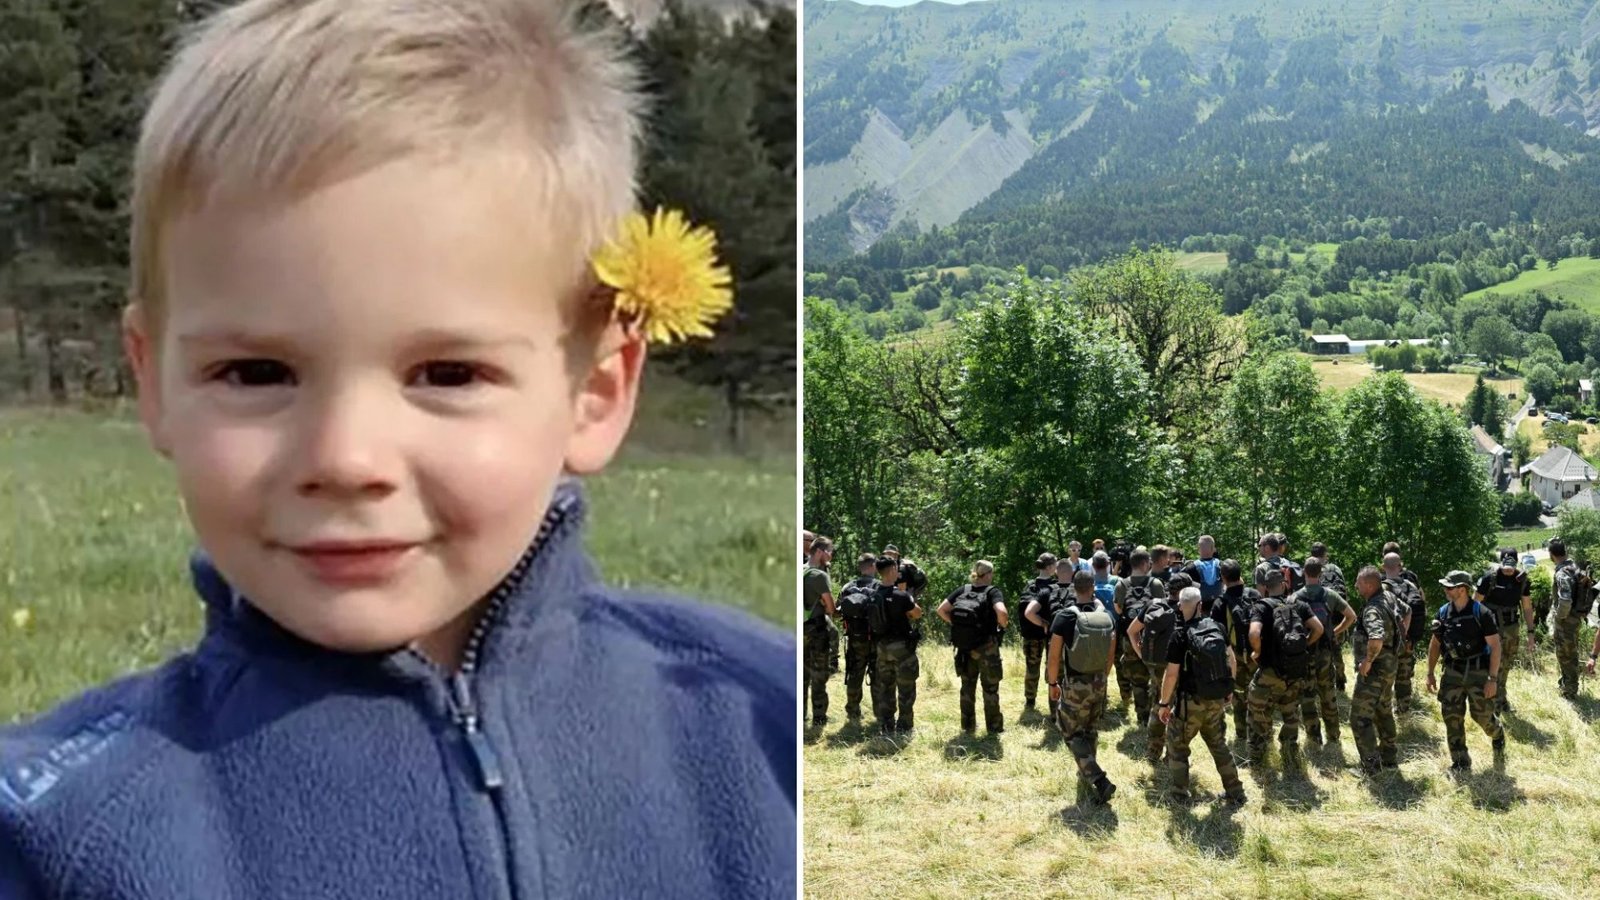 Tragic update on case of missing Emile as two year olds remains found in Alpine village nine months after he vanished